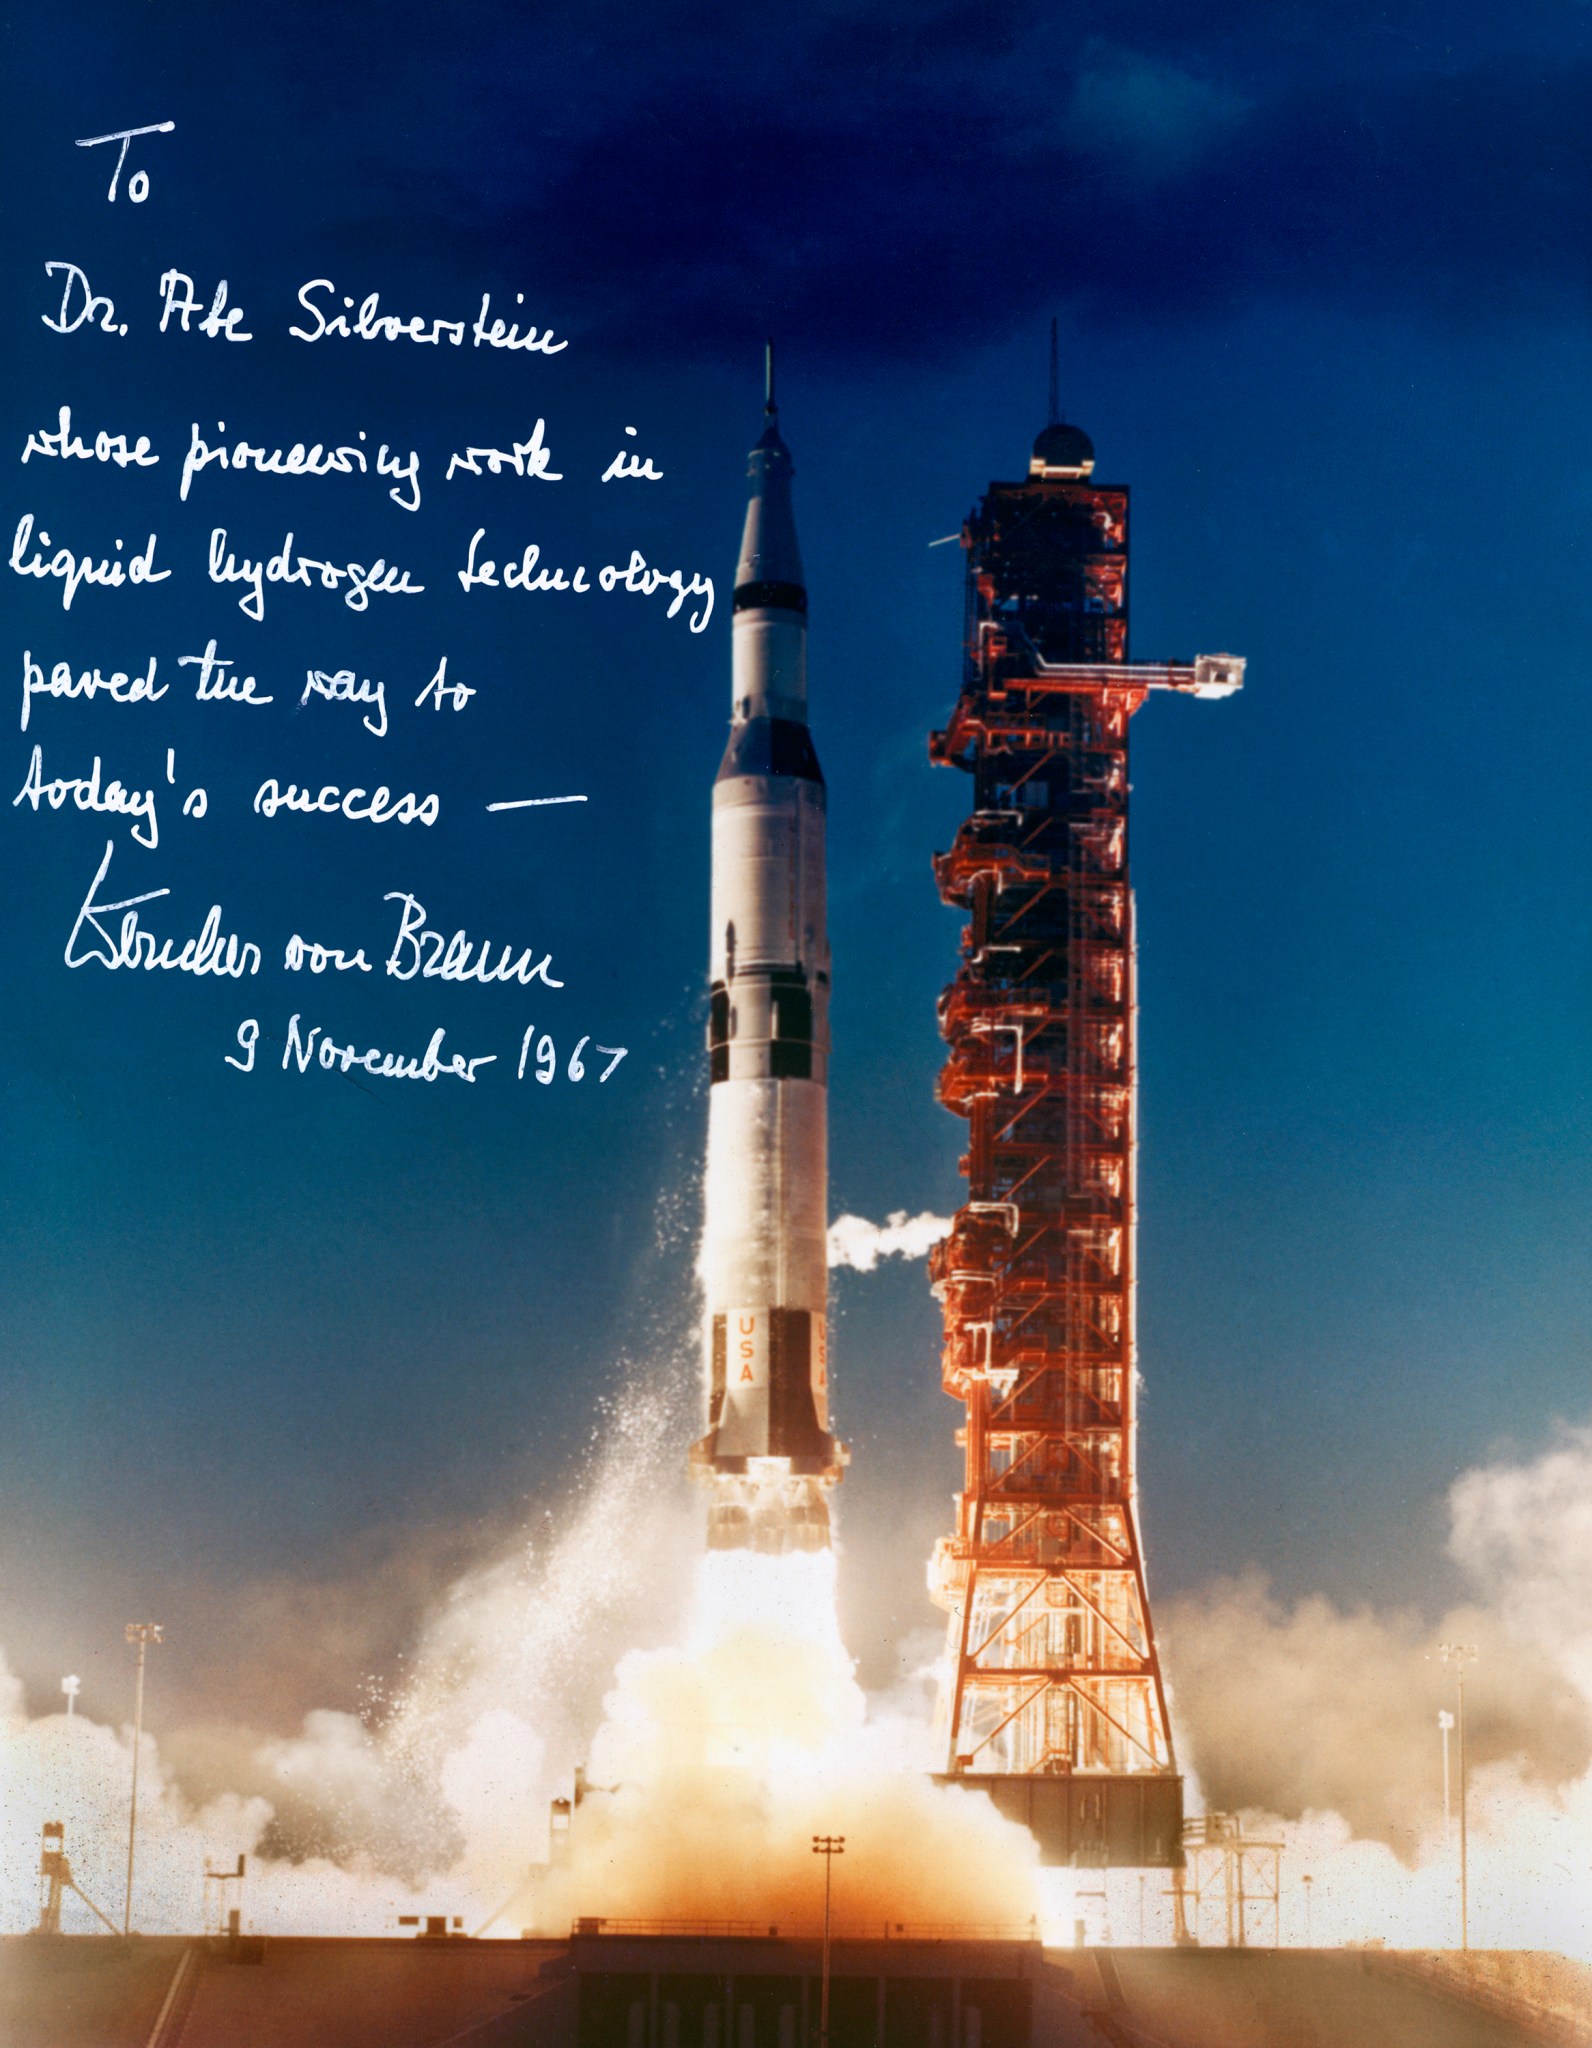 Photograph of Saturn V launch with note written on it.